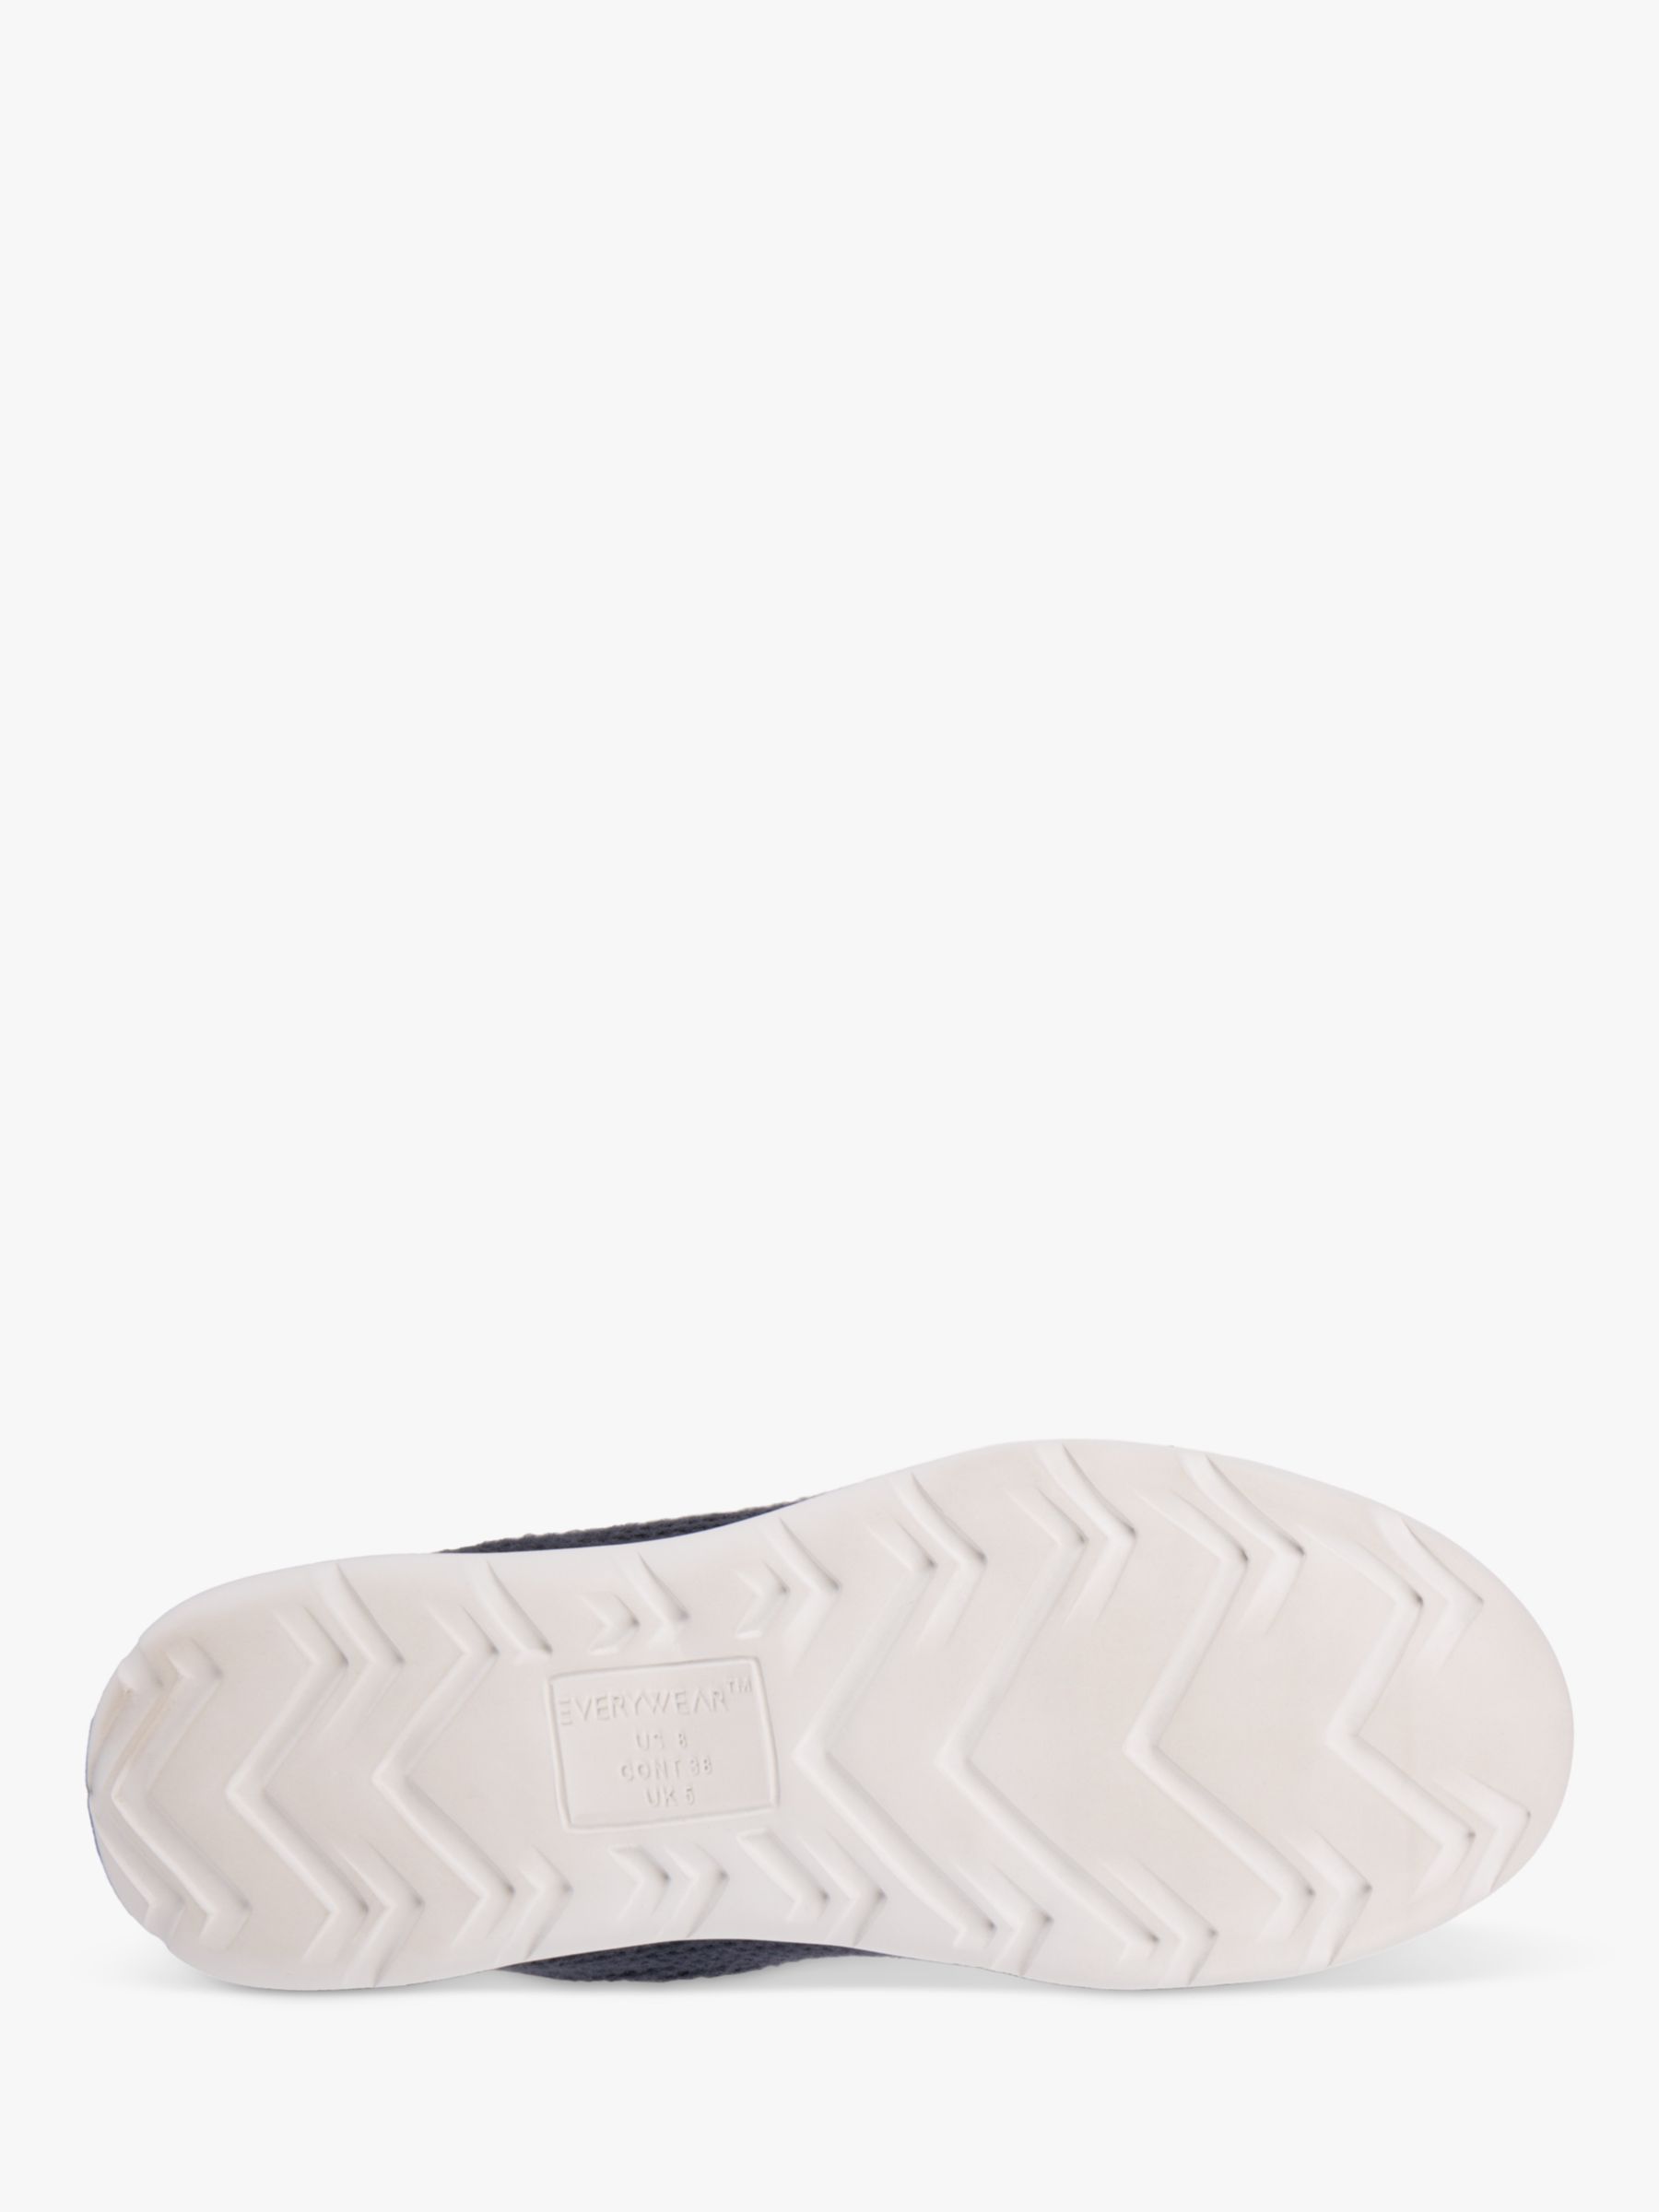 totes Iso Flex Waffle Bootie Slippers, Navy at John Lewis & Partners